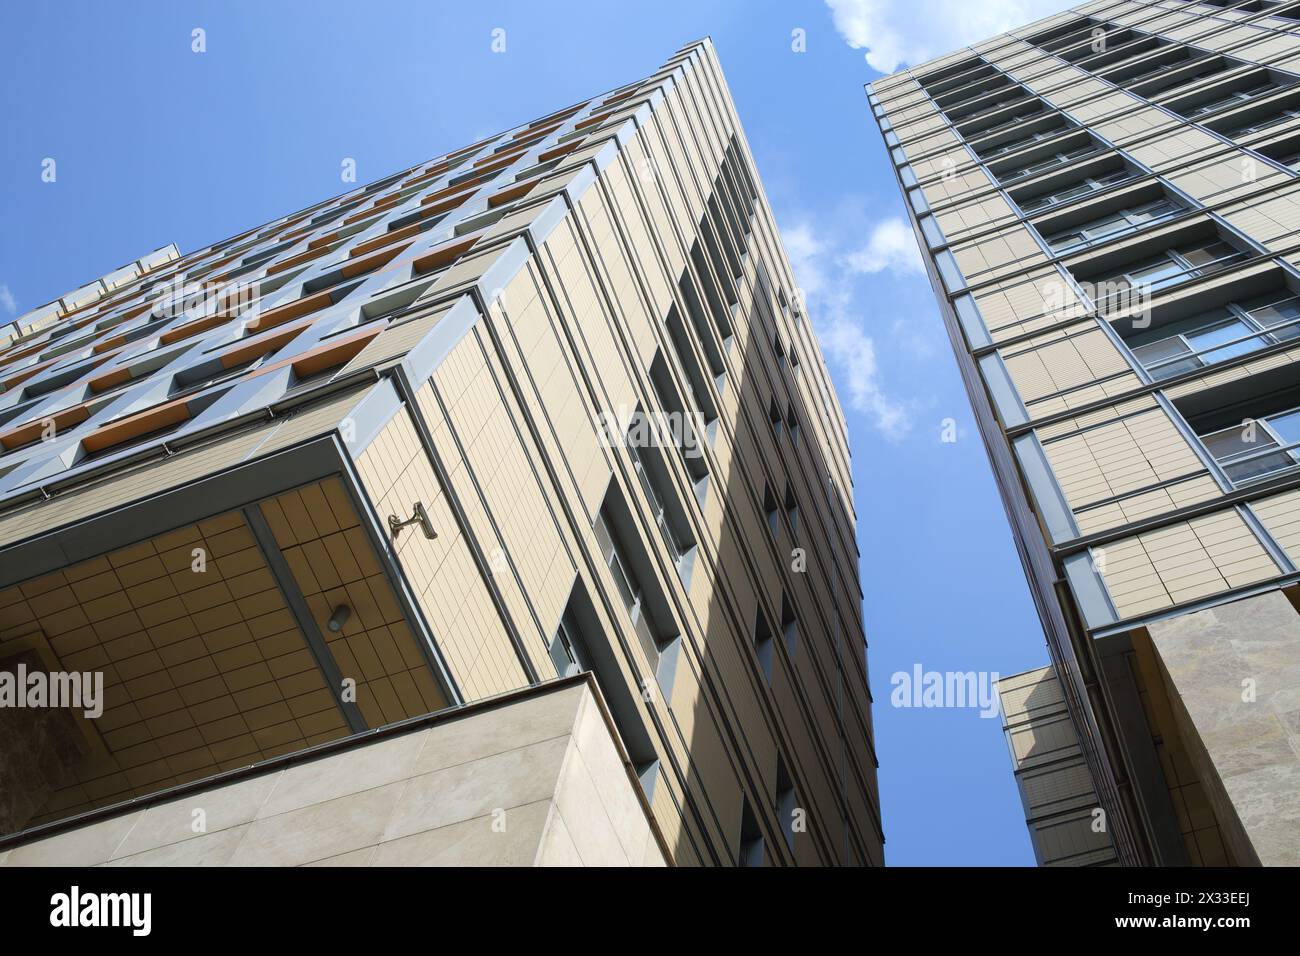 MOSCOW - MAY 24, 2014: The distance between the two facades of modern high-rise buildings residential complex Seventh Heaven, bottom view Stock Photo